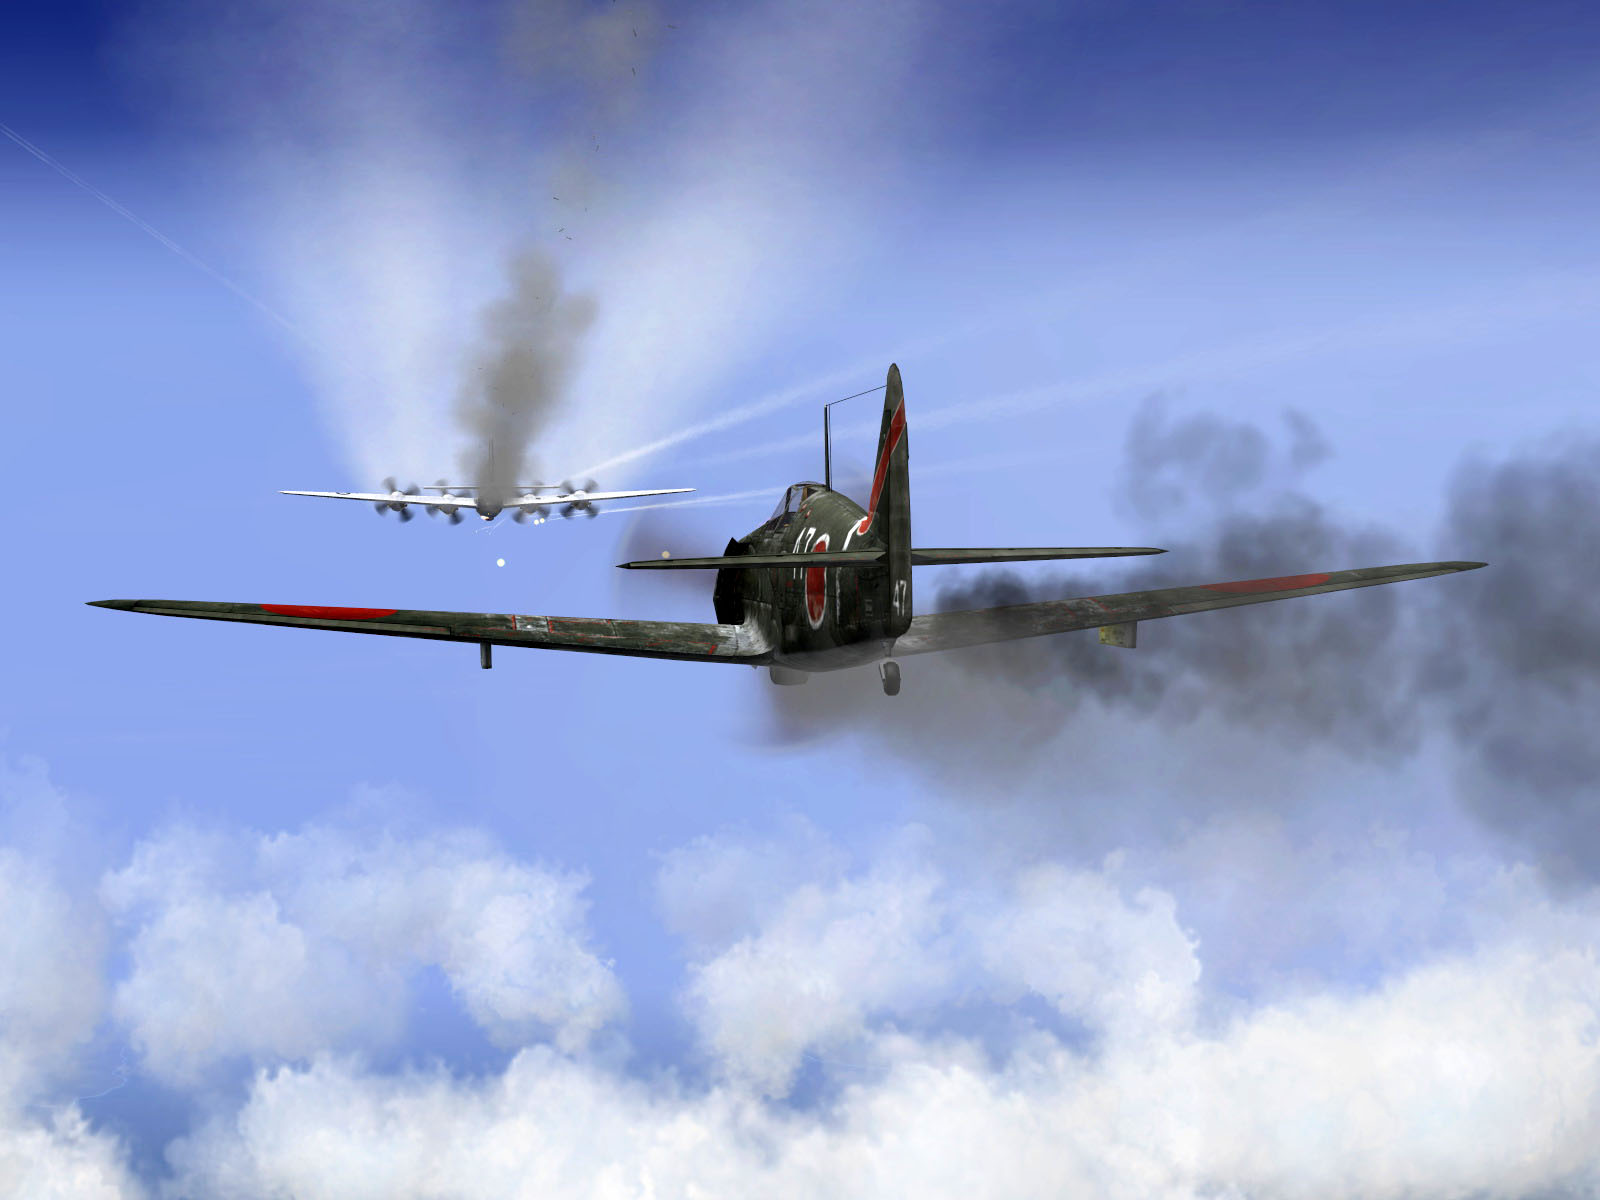 IL2 RO Ki 100 59 Sentai W47 continues the attack after being hit by 20AF B 29s V01